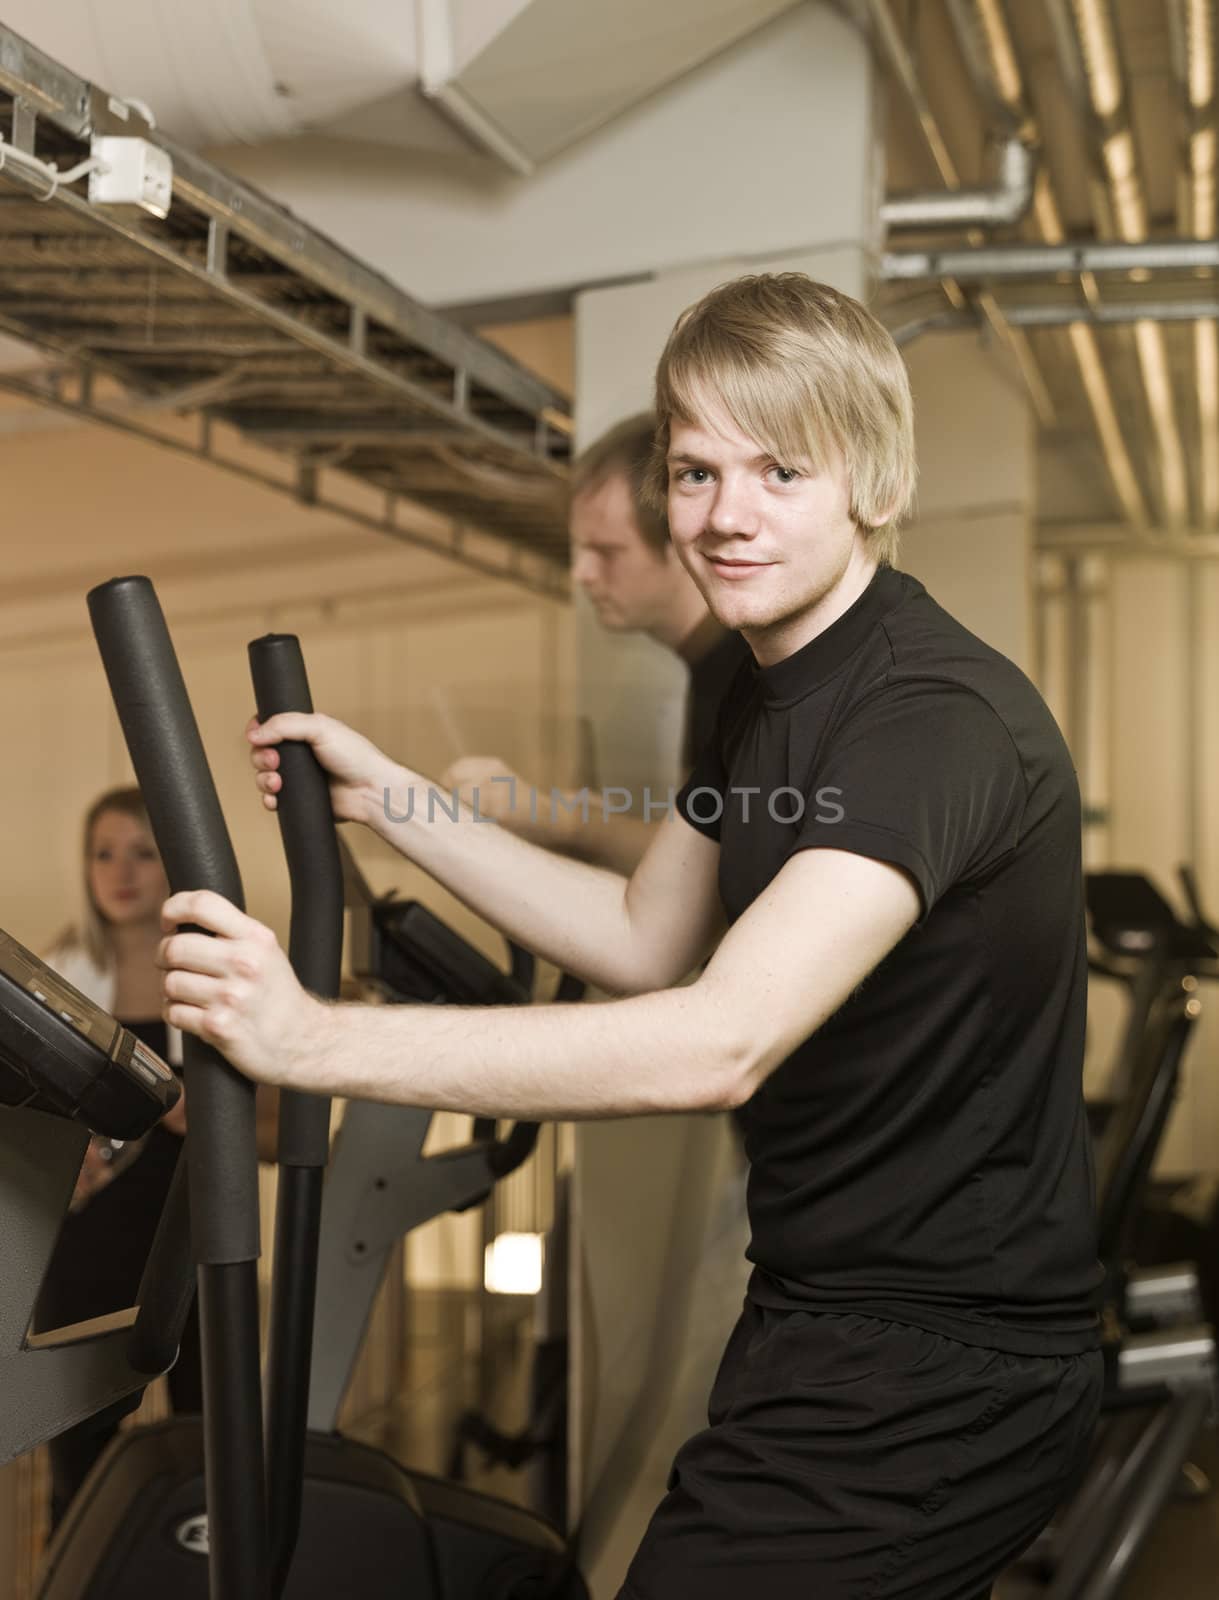 Young man looking into the camera while using an exercise machine